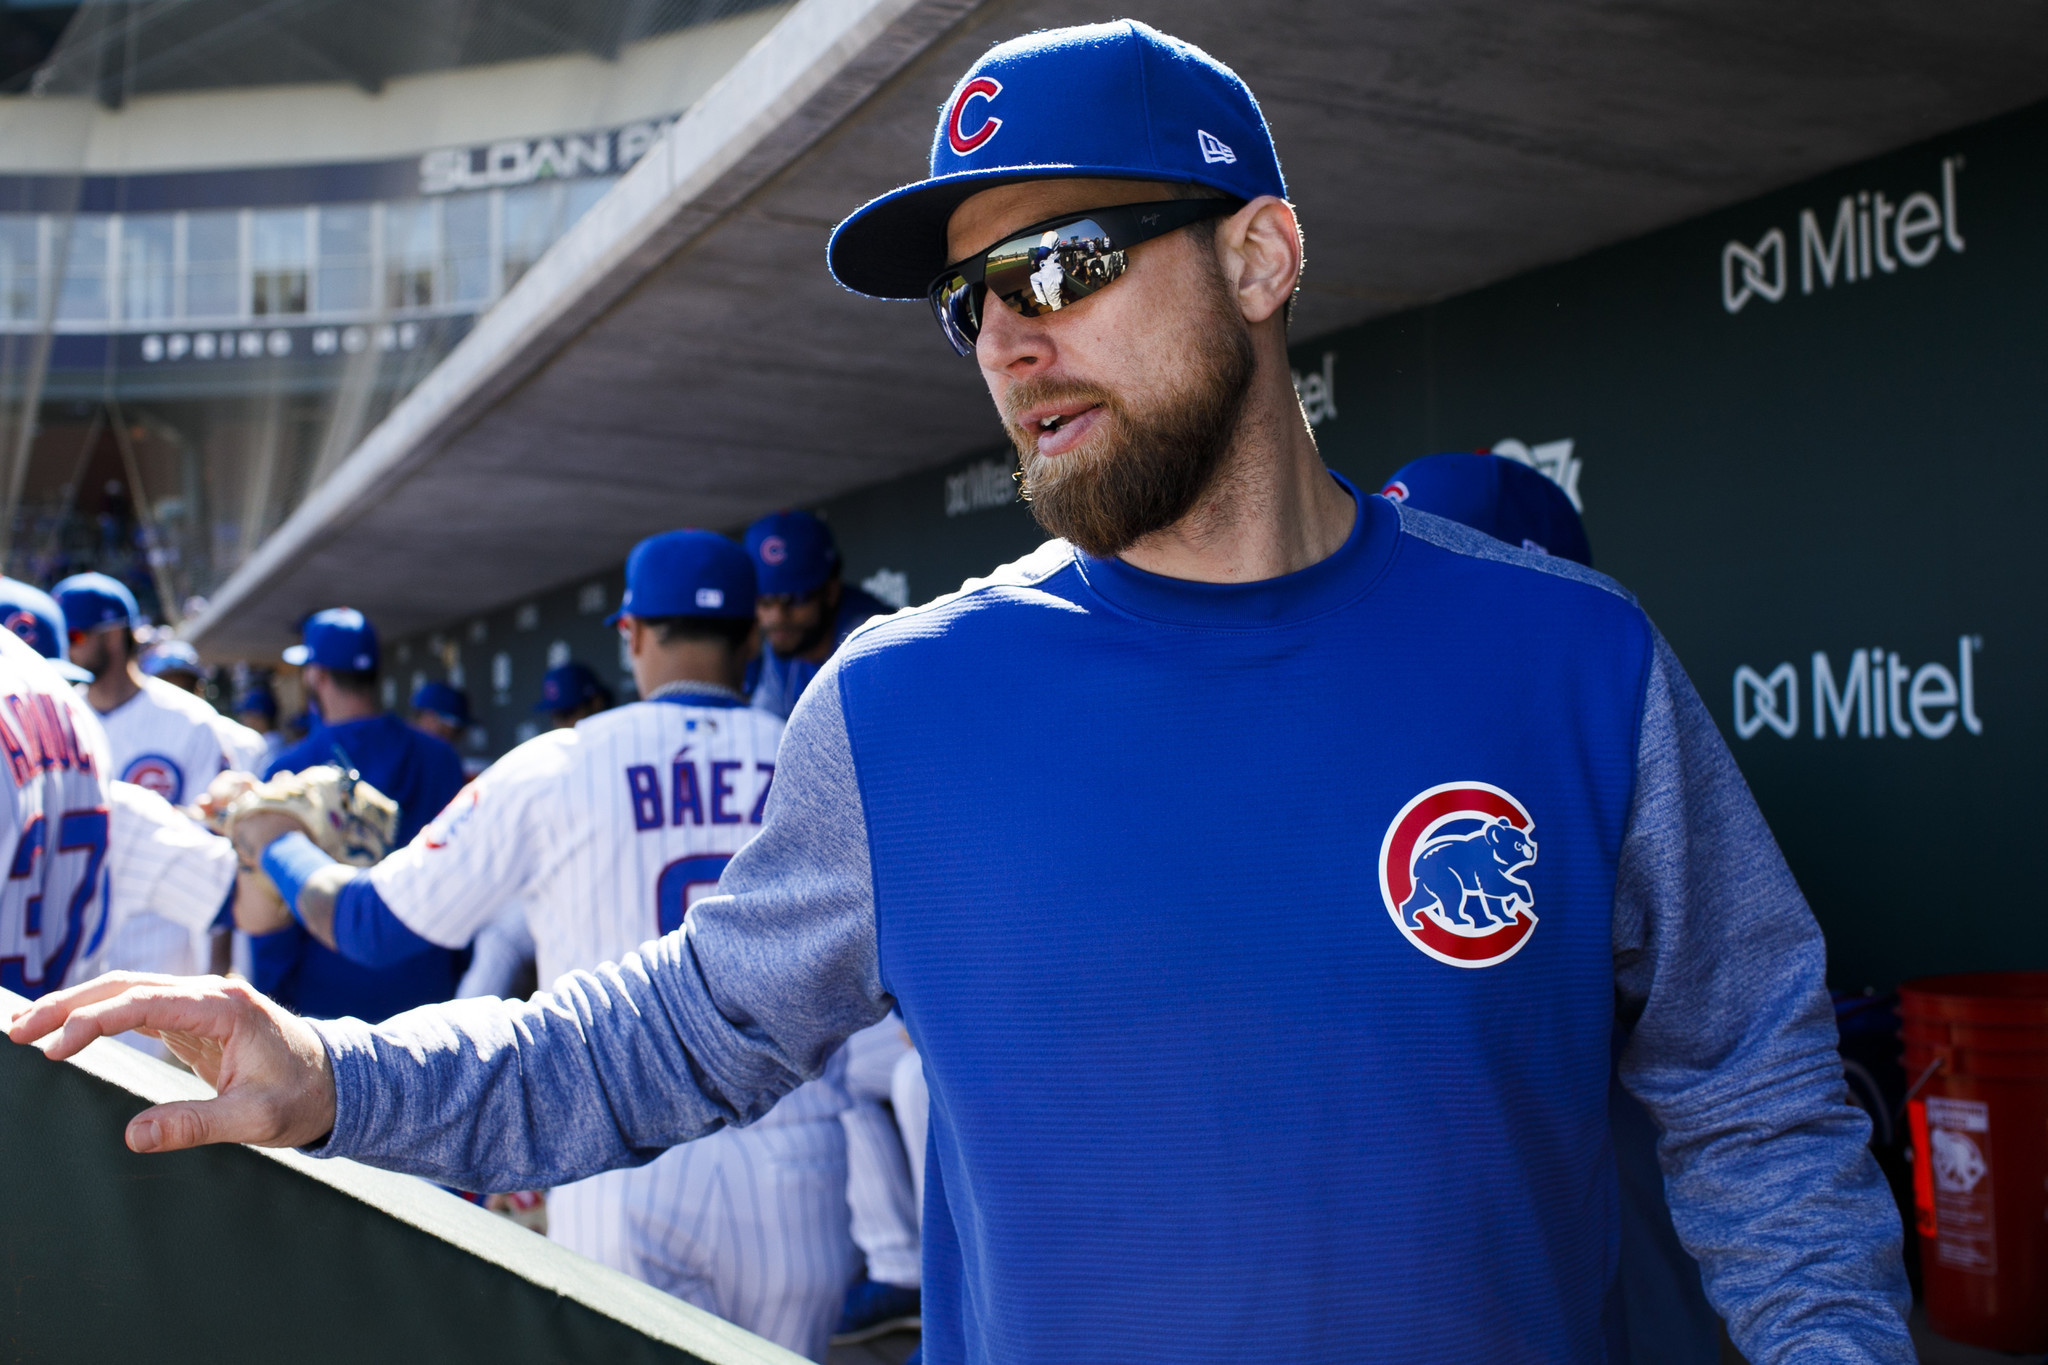 Ex-Cubs player Ben Zobrist's wife and pastor had affair, lawsuit says